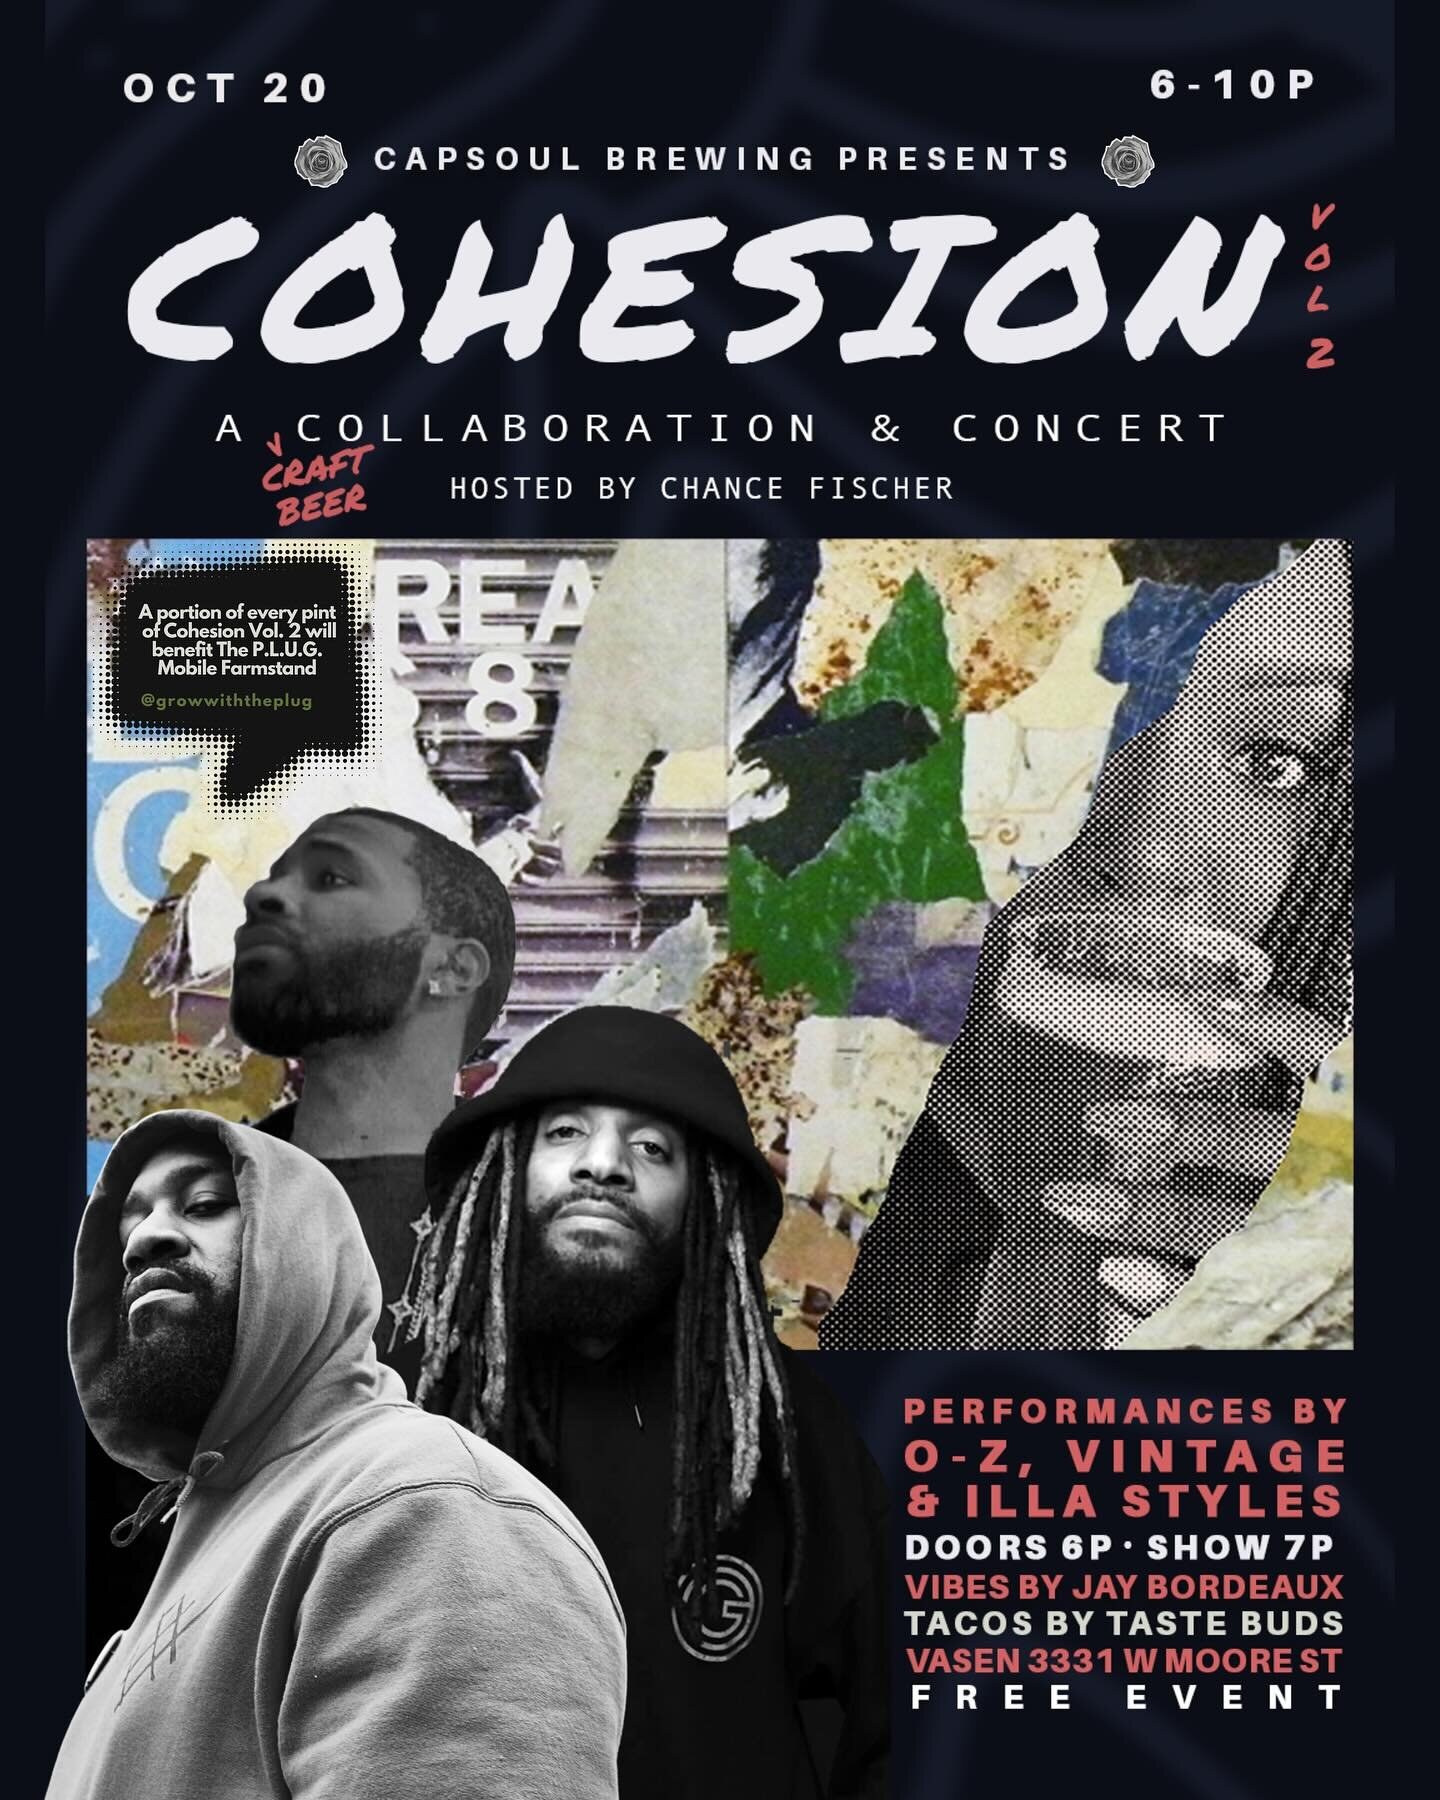 We are thrilled to announce that we&rsquo;ve rescheduled our Cohesion Vol. 2 collaboration and concert for October 20th!

To everyone: thank you for your patience and understanding while we reorganized this event. 

Now, let&rsquo;s tap into these de